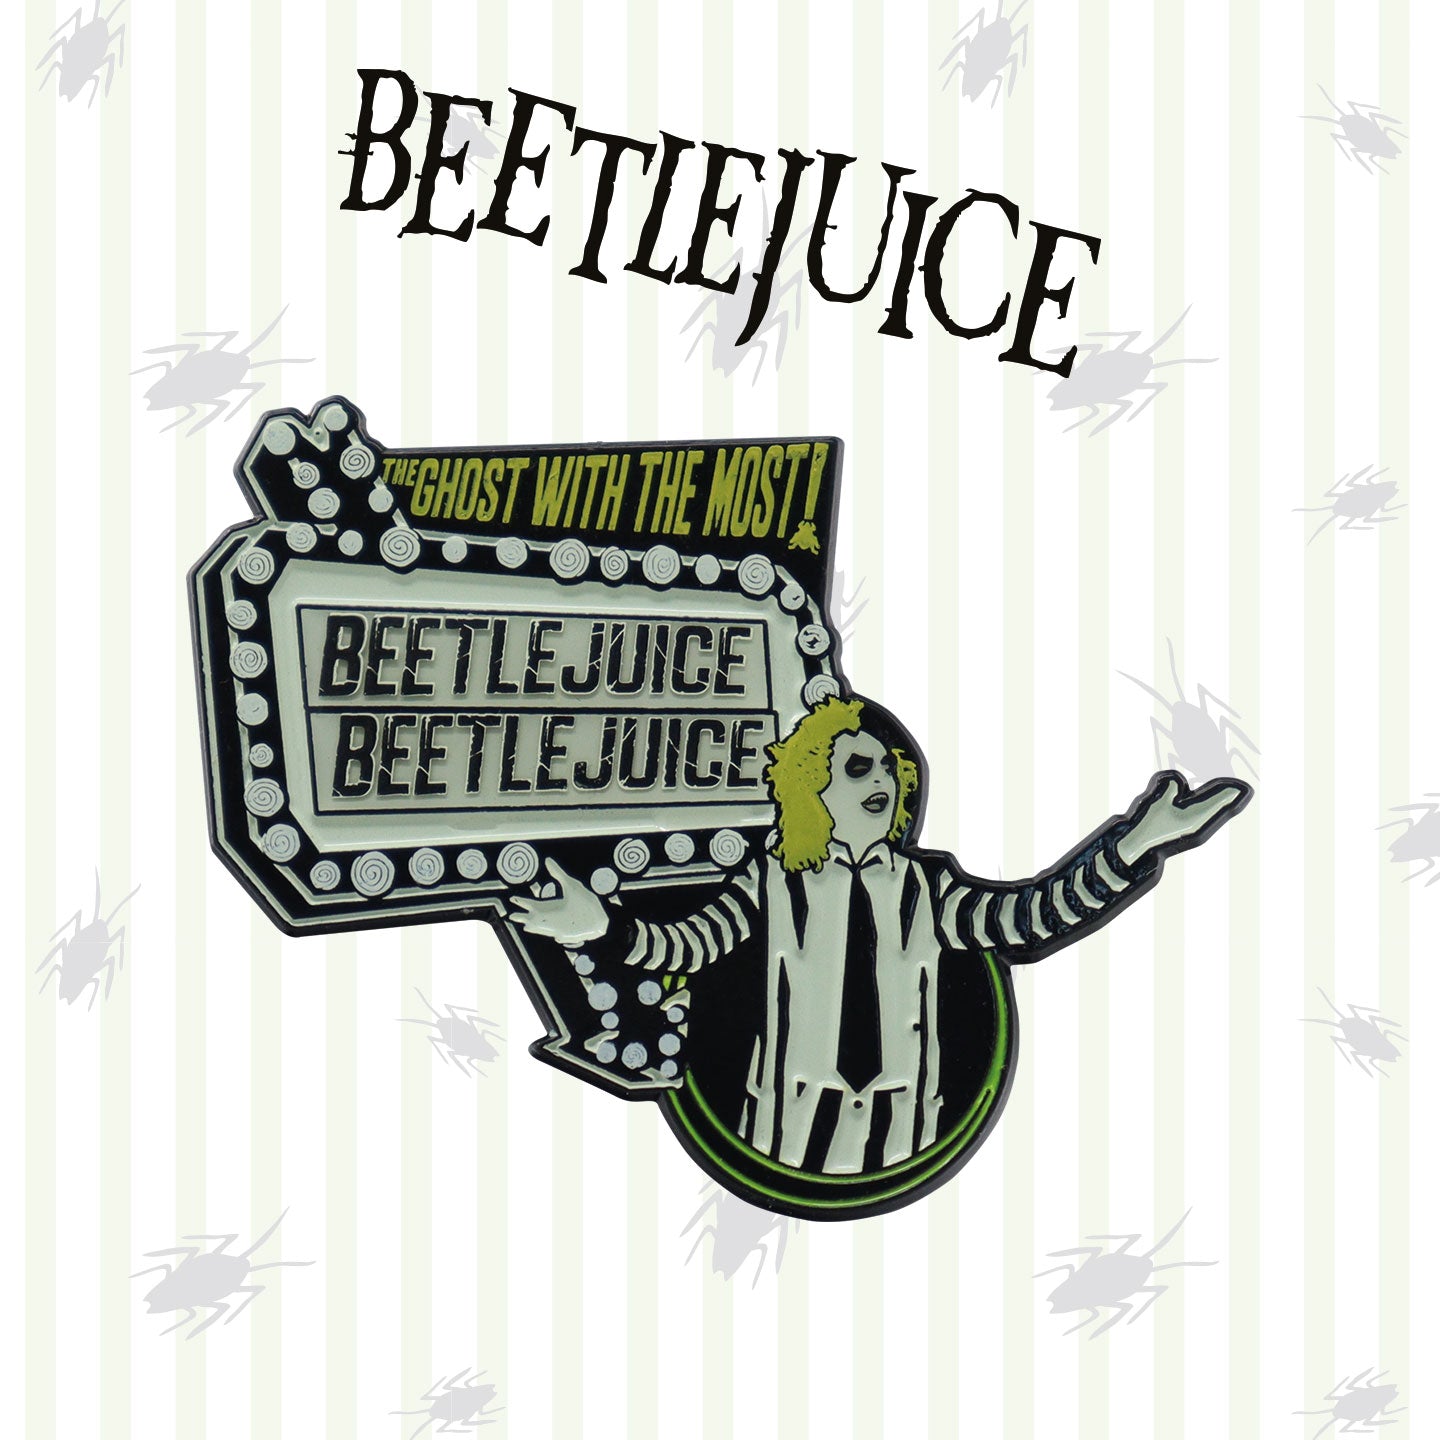 Beetlejuice Limited Edition Pin Badge